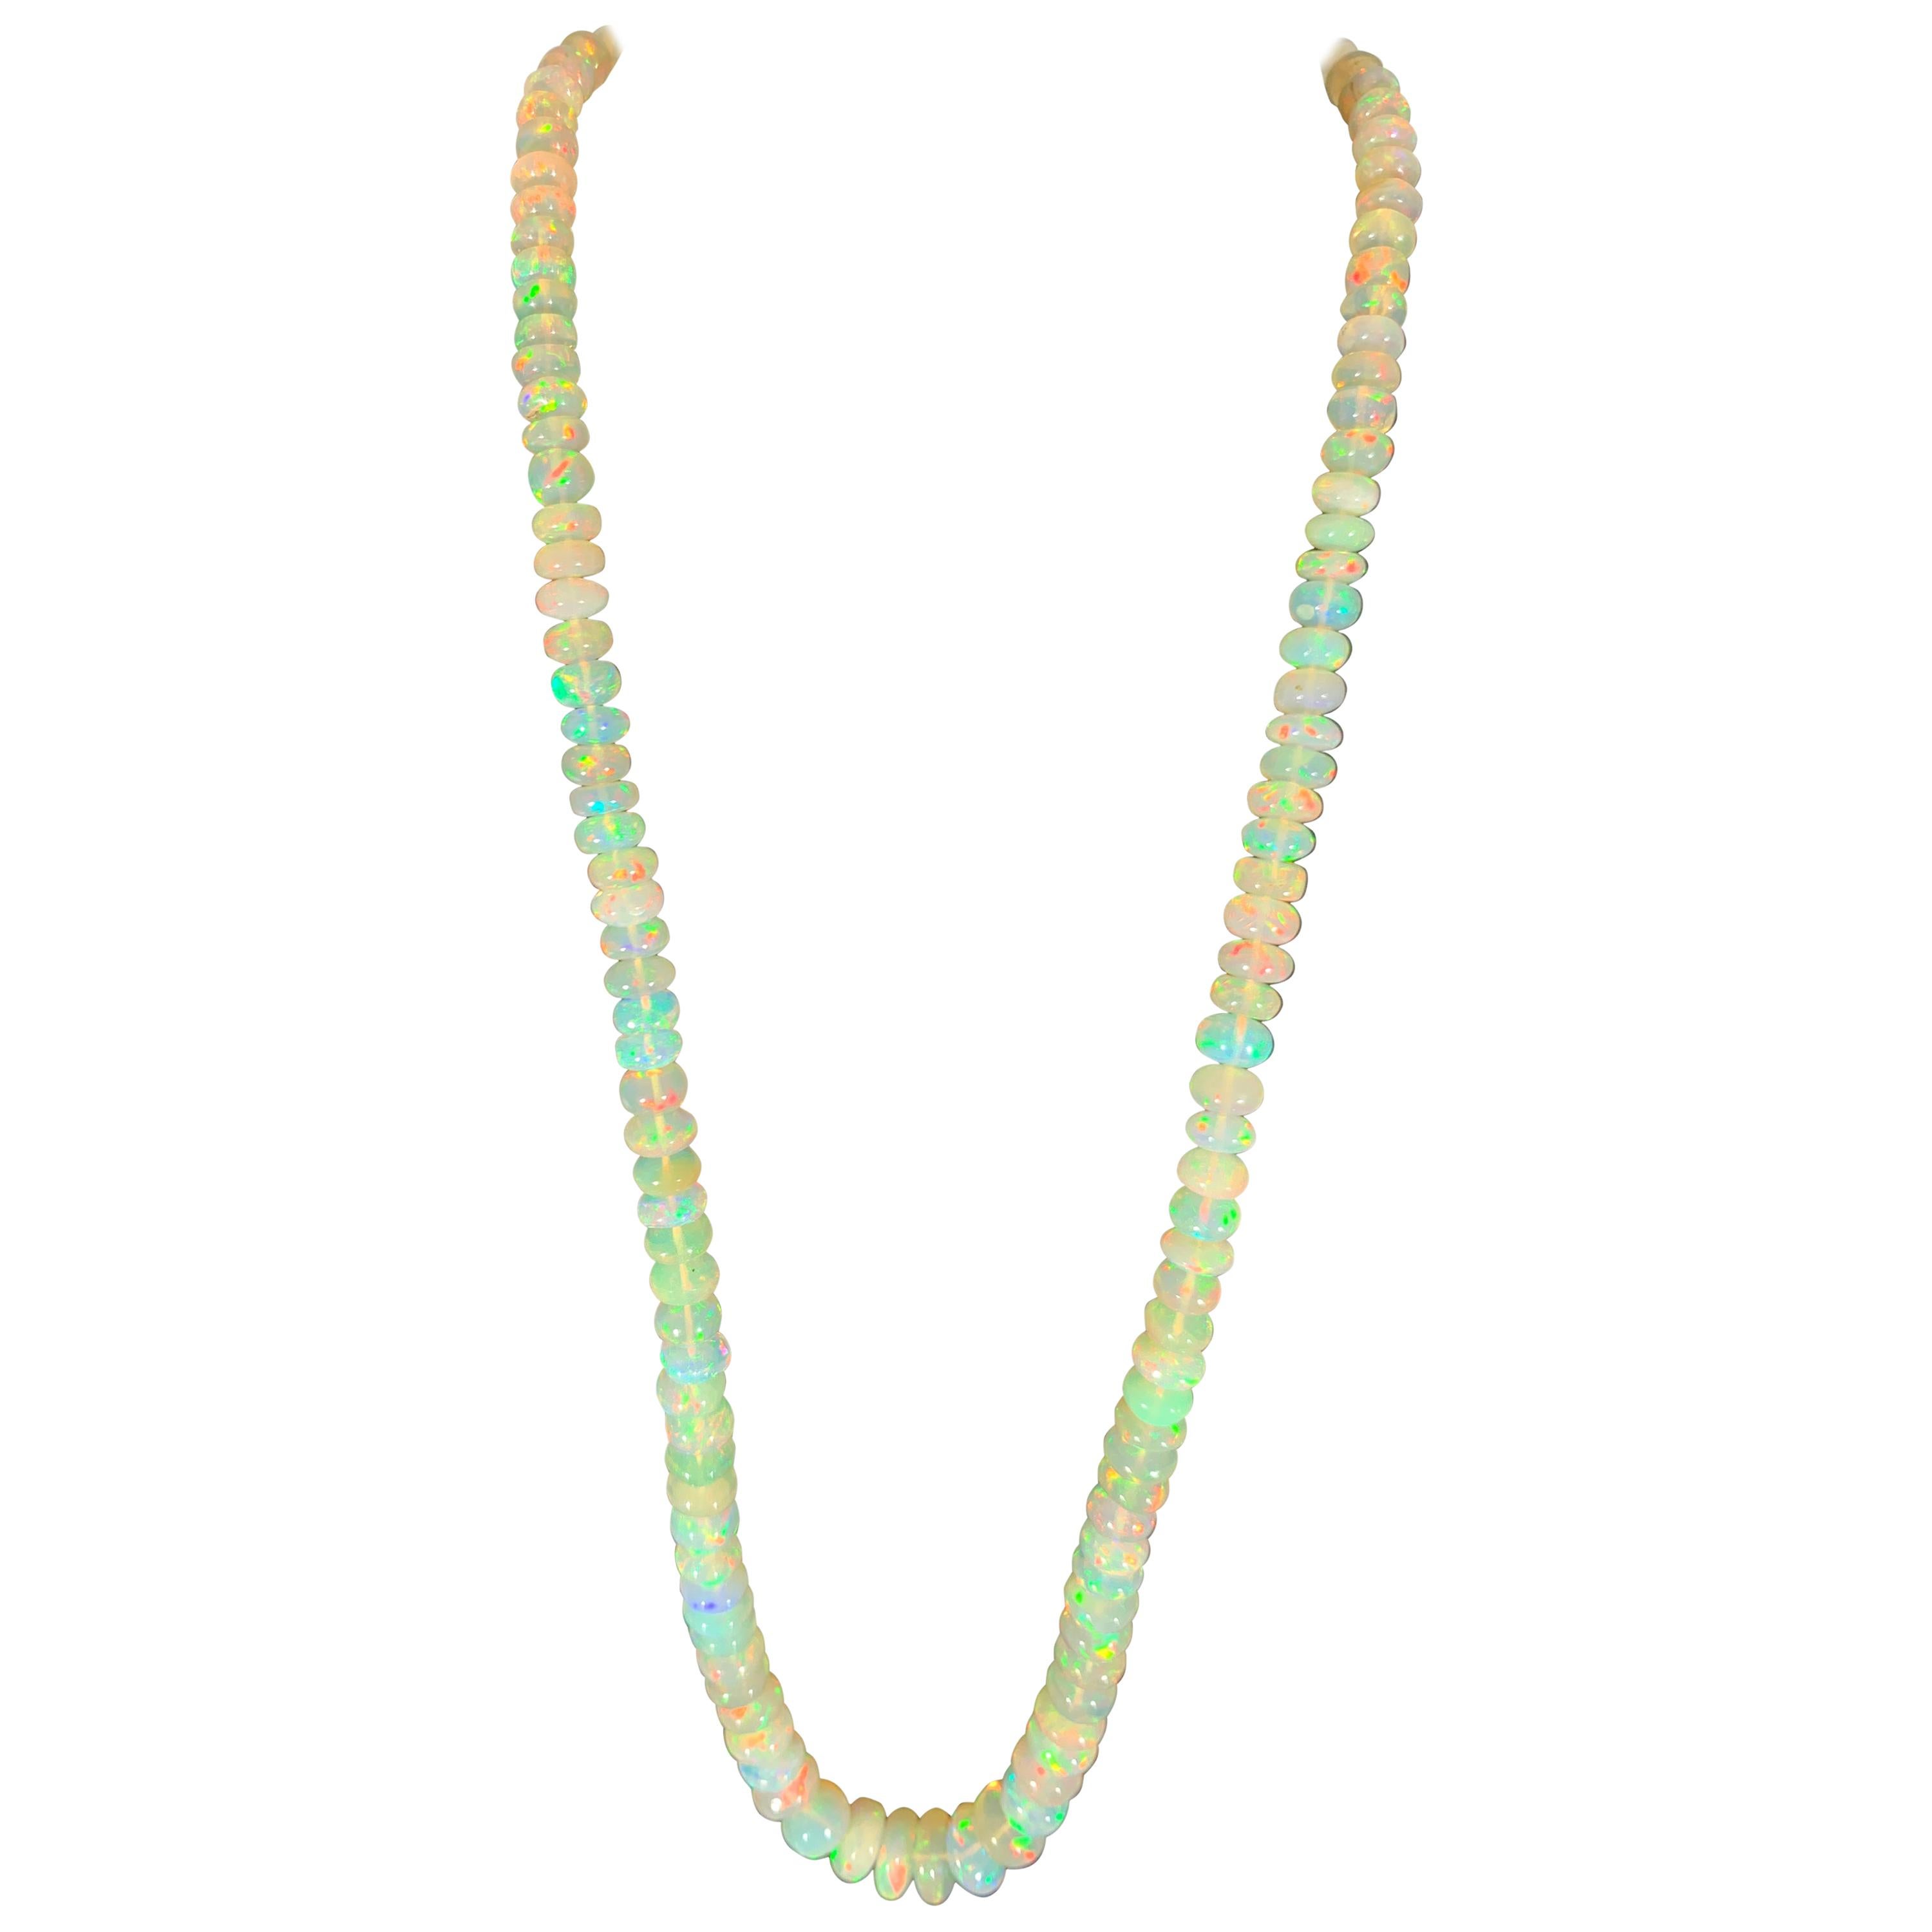 Natural 114 Ct Ethiopian Opal Bead Single Strand Necklace 14 Karat Yellow Gold For Sale